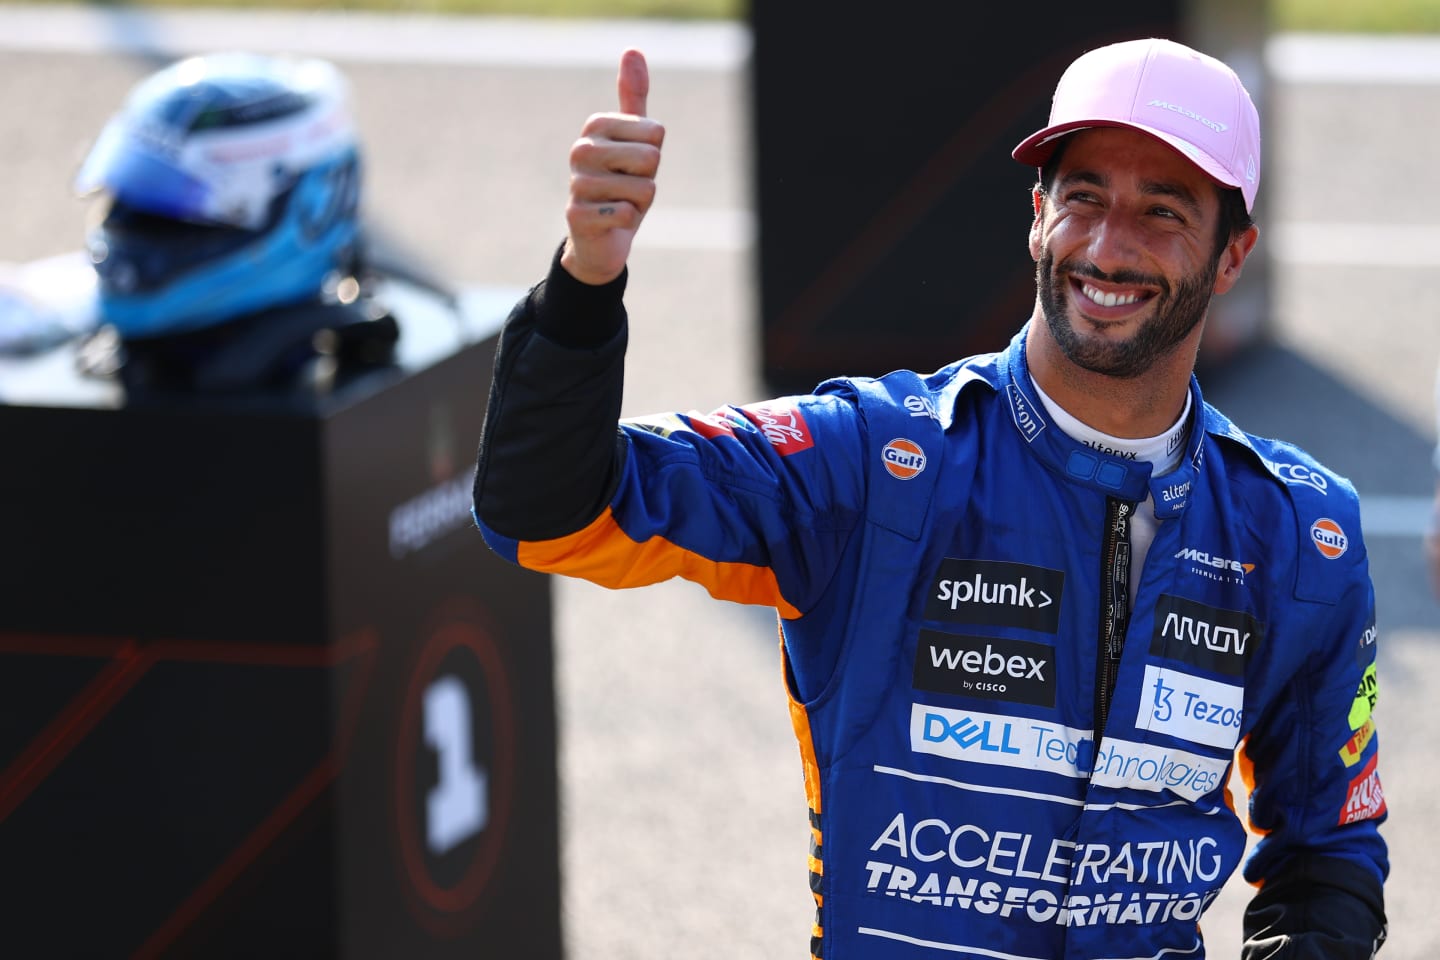 MONZA, ITALY - SEPTEMBER 11: Third place finisher Daniel Ricciardo of Australia and McLaren F1 celebrates in parc ferme during the Sprint ahead of the F1 Grand Prix of Italy at Autodromo di Monza on September 11, 2021 in Monza, Italy. (Photo by Bryn Lennon/Getty Images)